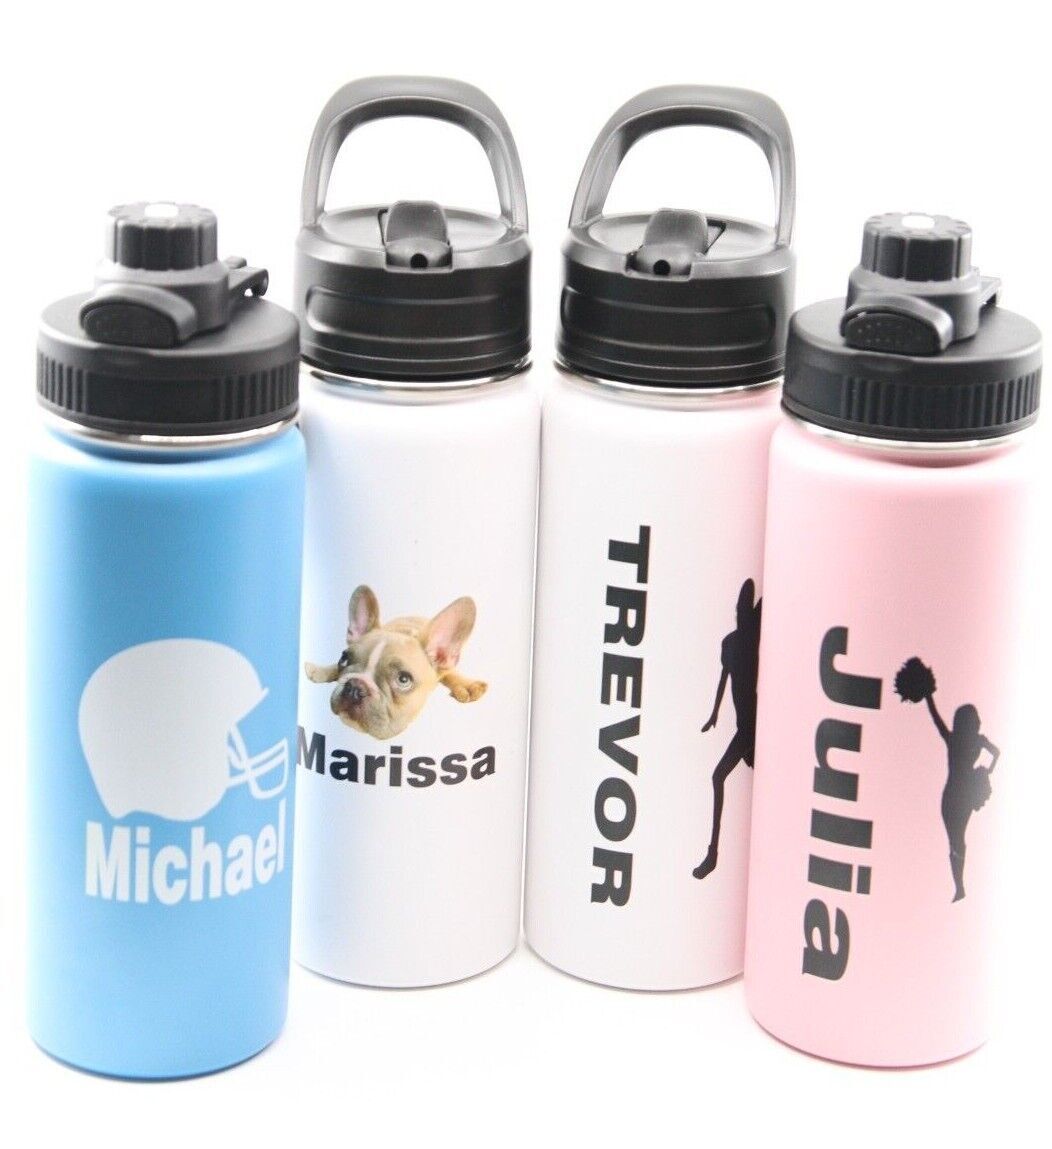 Personalized Insulated Sports 18/32oz Hydro Water Bottle Custom & Engraved Free